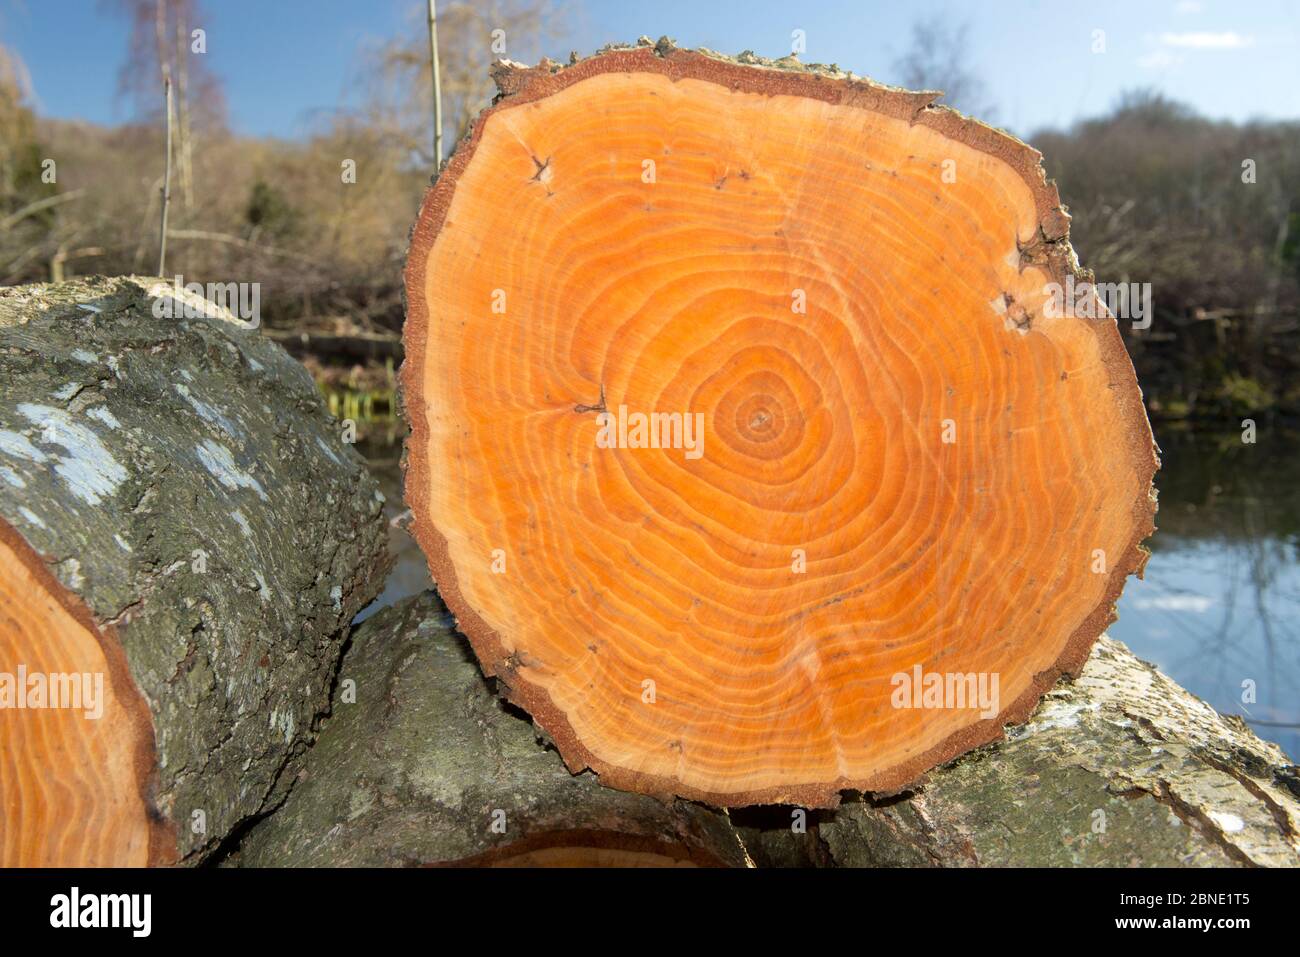 Alder  tree (Alnus glutinosa) cut  log showing growth rings, felled at 22 years of age, Herefordshire, England, UK, March. Stock Photo